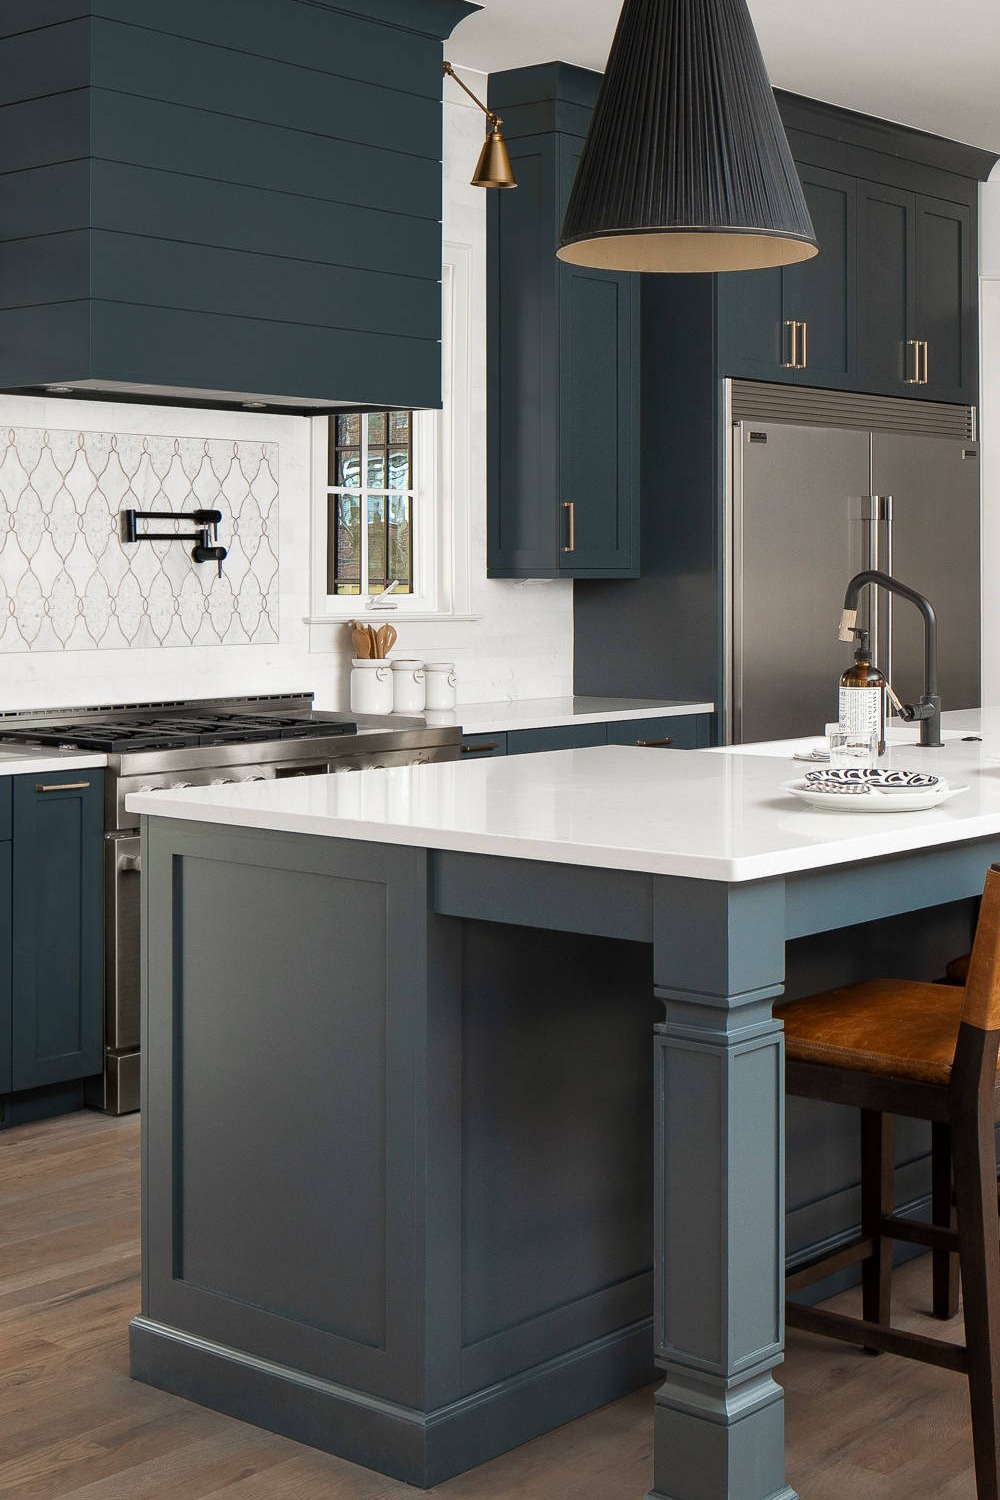 Sharp Contrast Silvery Color Appliance Finish White Backsplash Appliance Finishes White Appliances